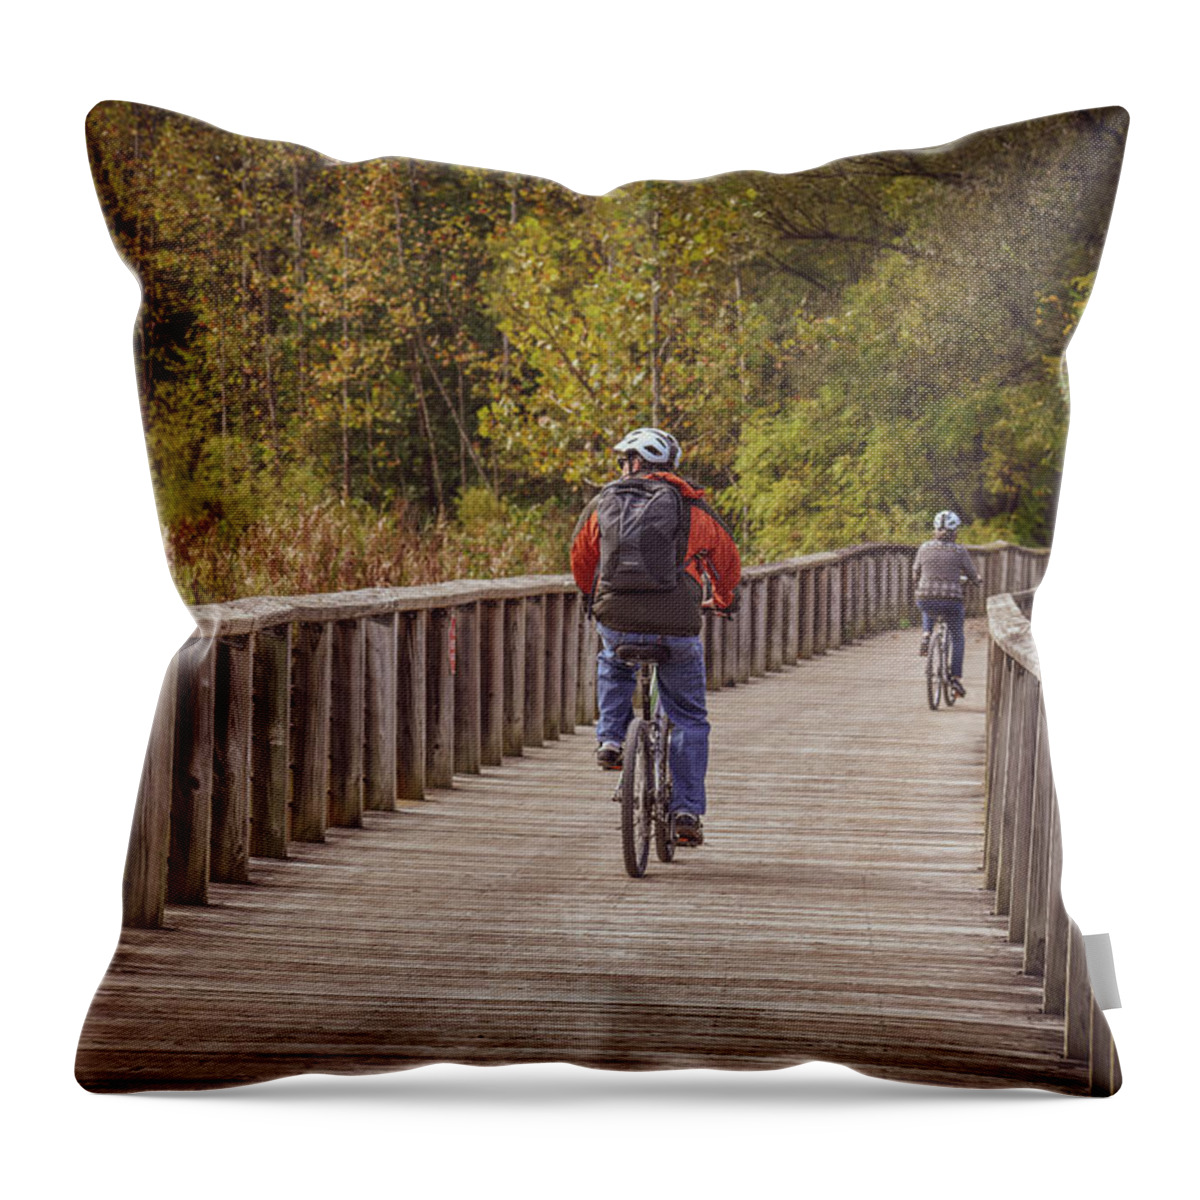 Bike Throw Pillow featuring the photograph Bikers by Michelle Wittensoldner